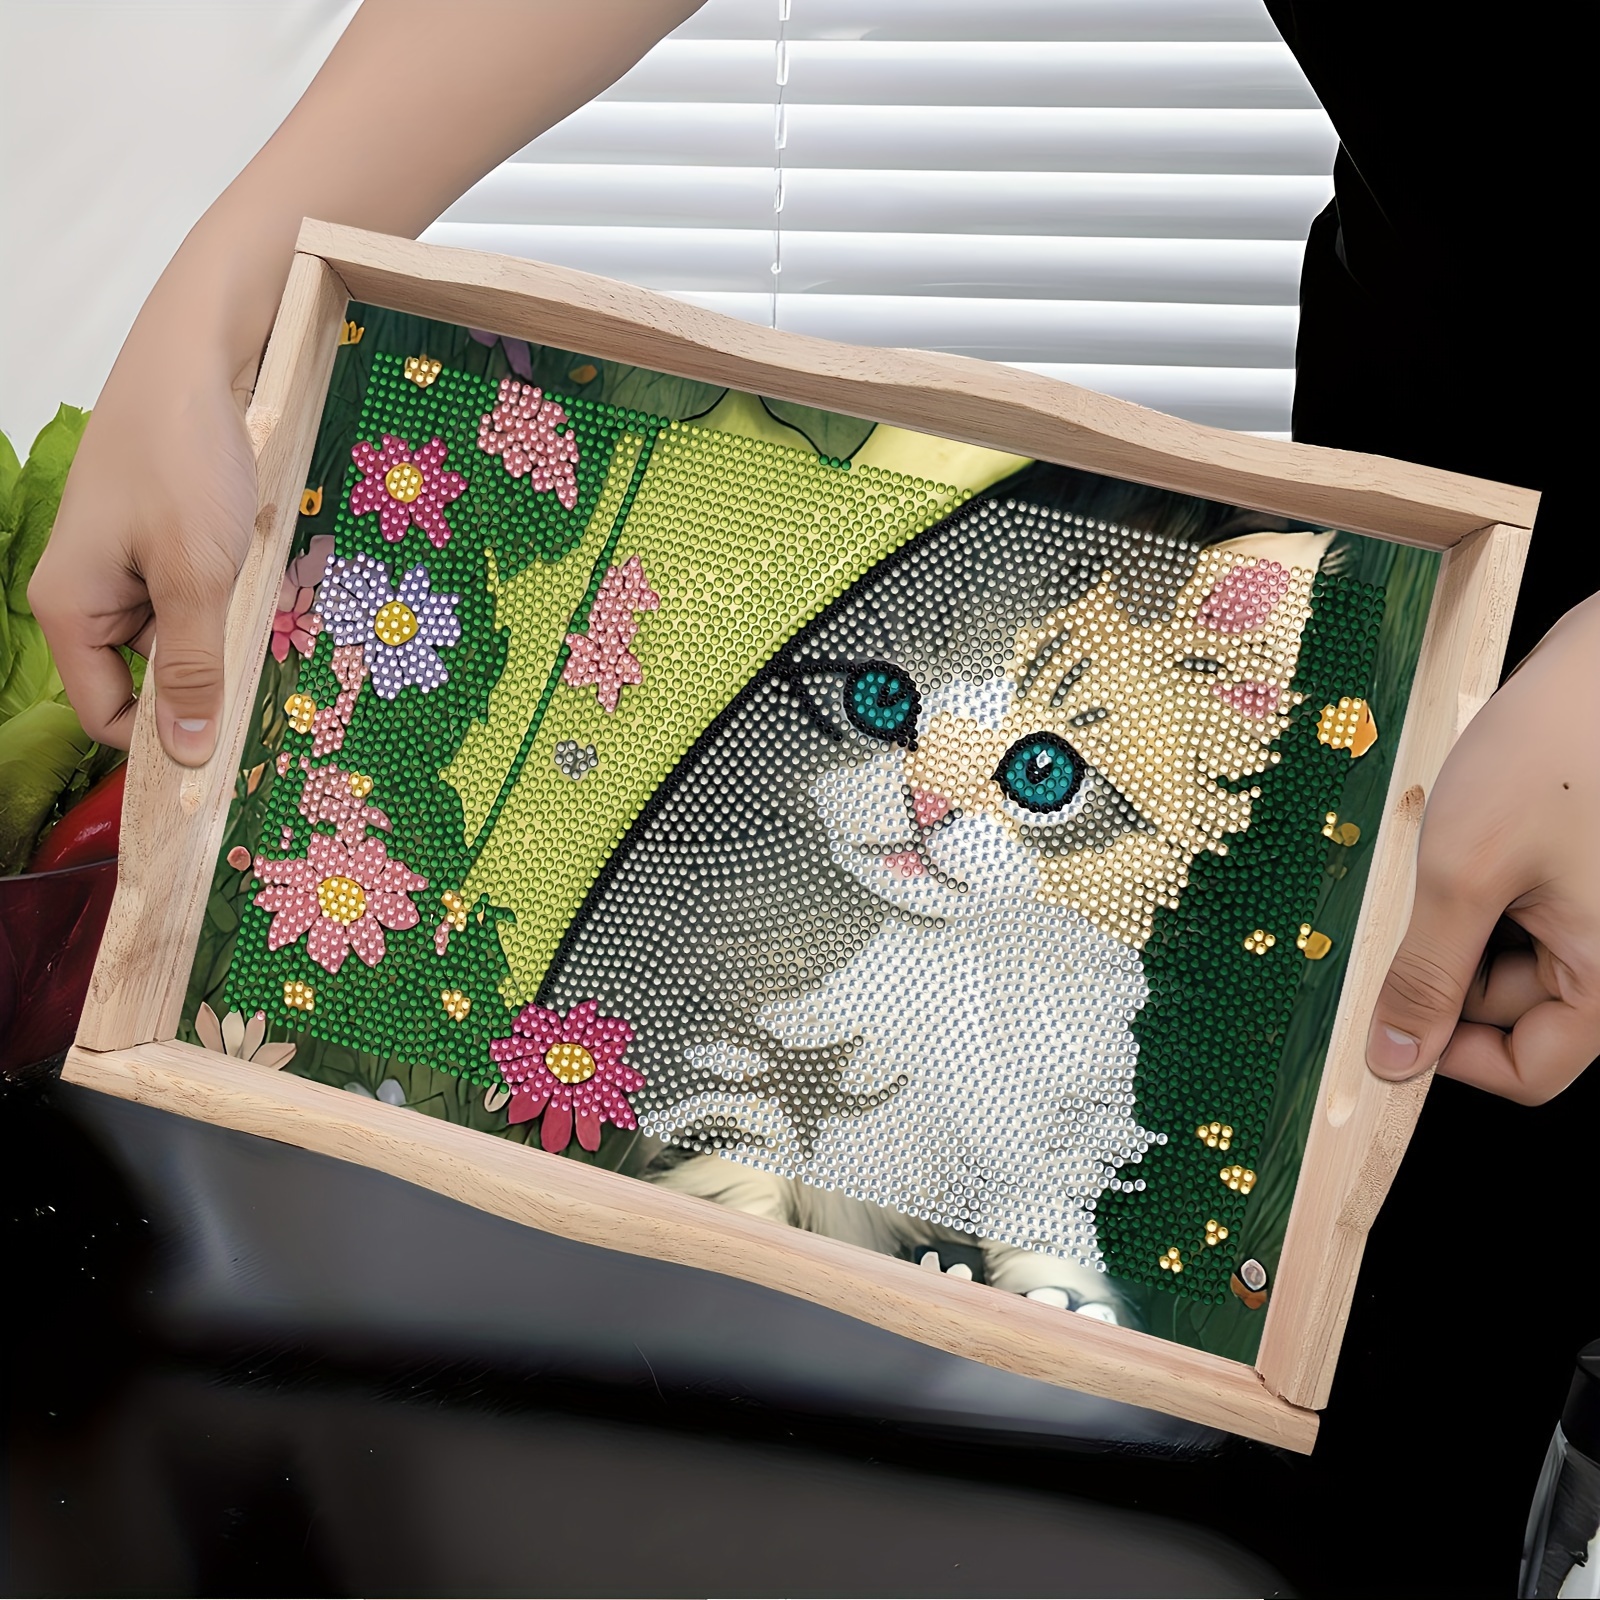 

Diy Diamond Painting Tray Kit For Adults With Wooden Frame - Cat Pattern Craft Tray Set, Includes Resin Diamonds, Tools & Tray With Handles - Elegant Handcrafted Serving Platter For Home Entertaining